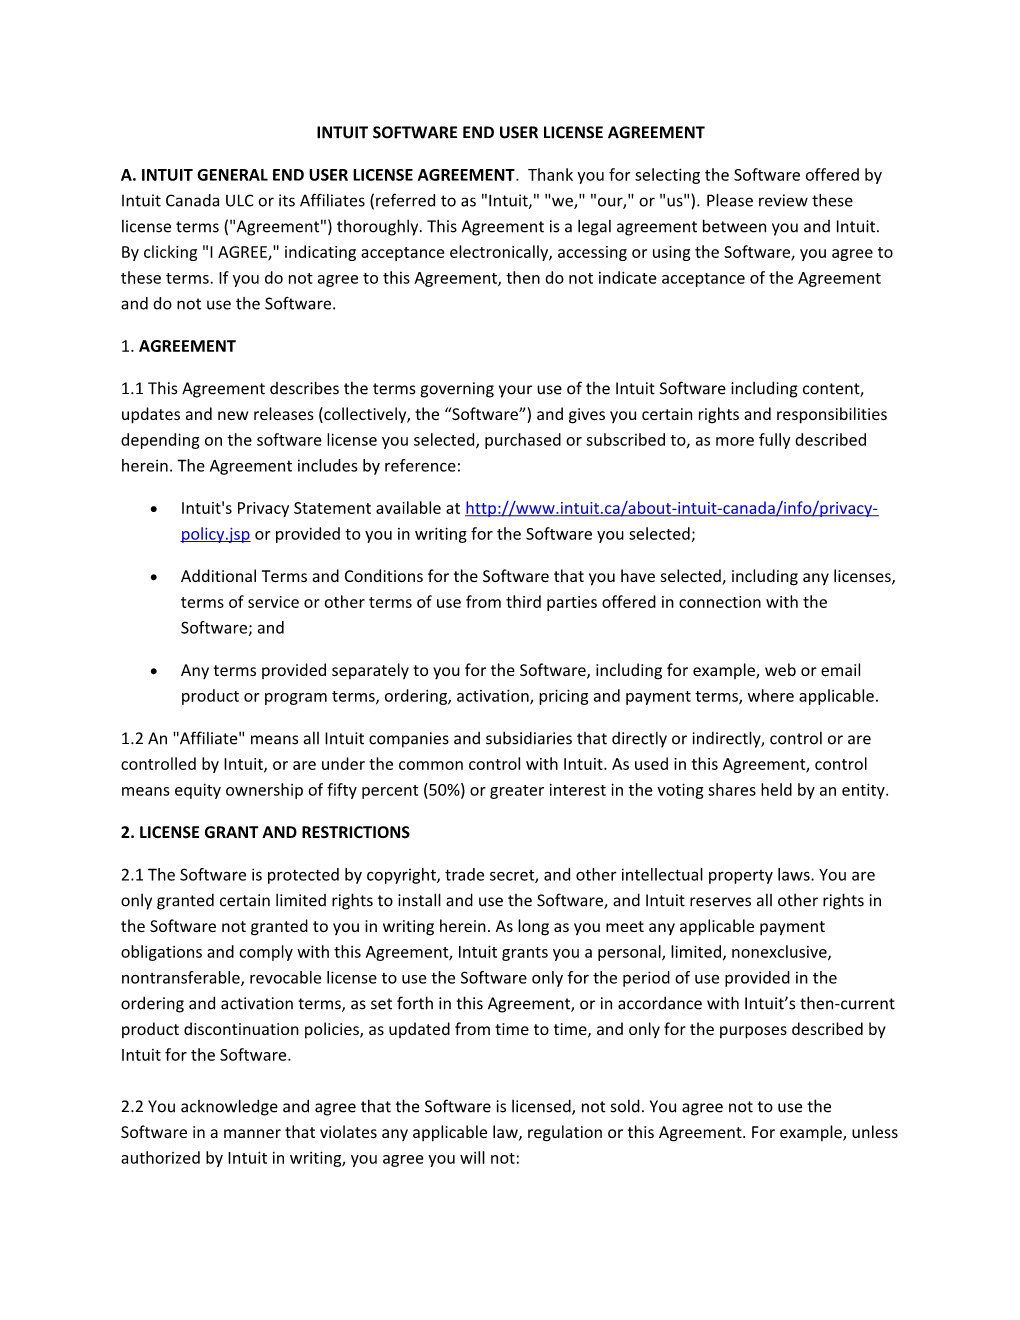 Intuit Software End User License Agreement